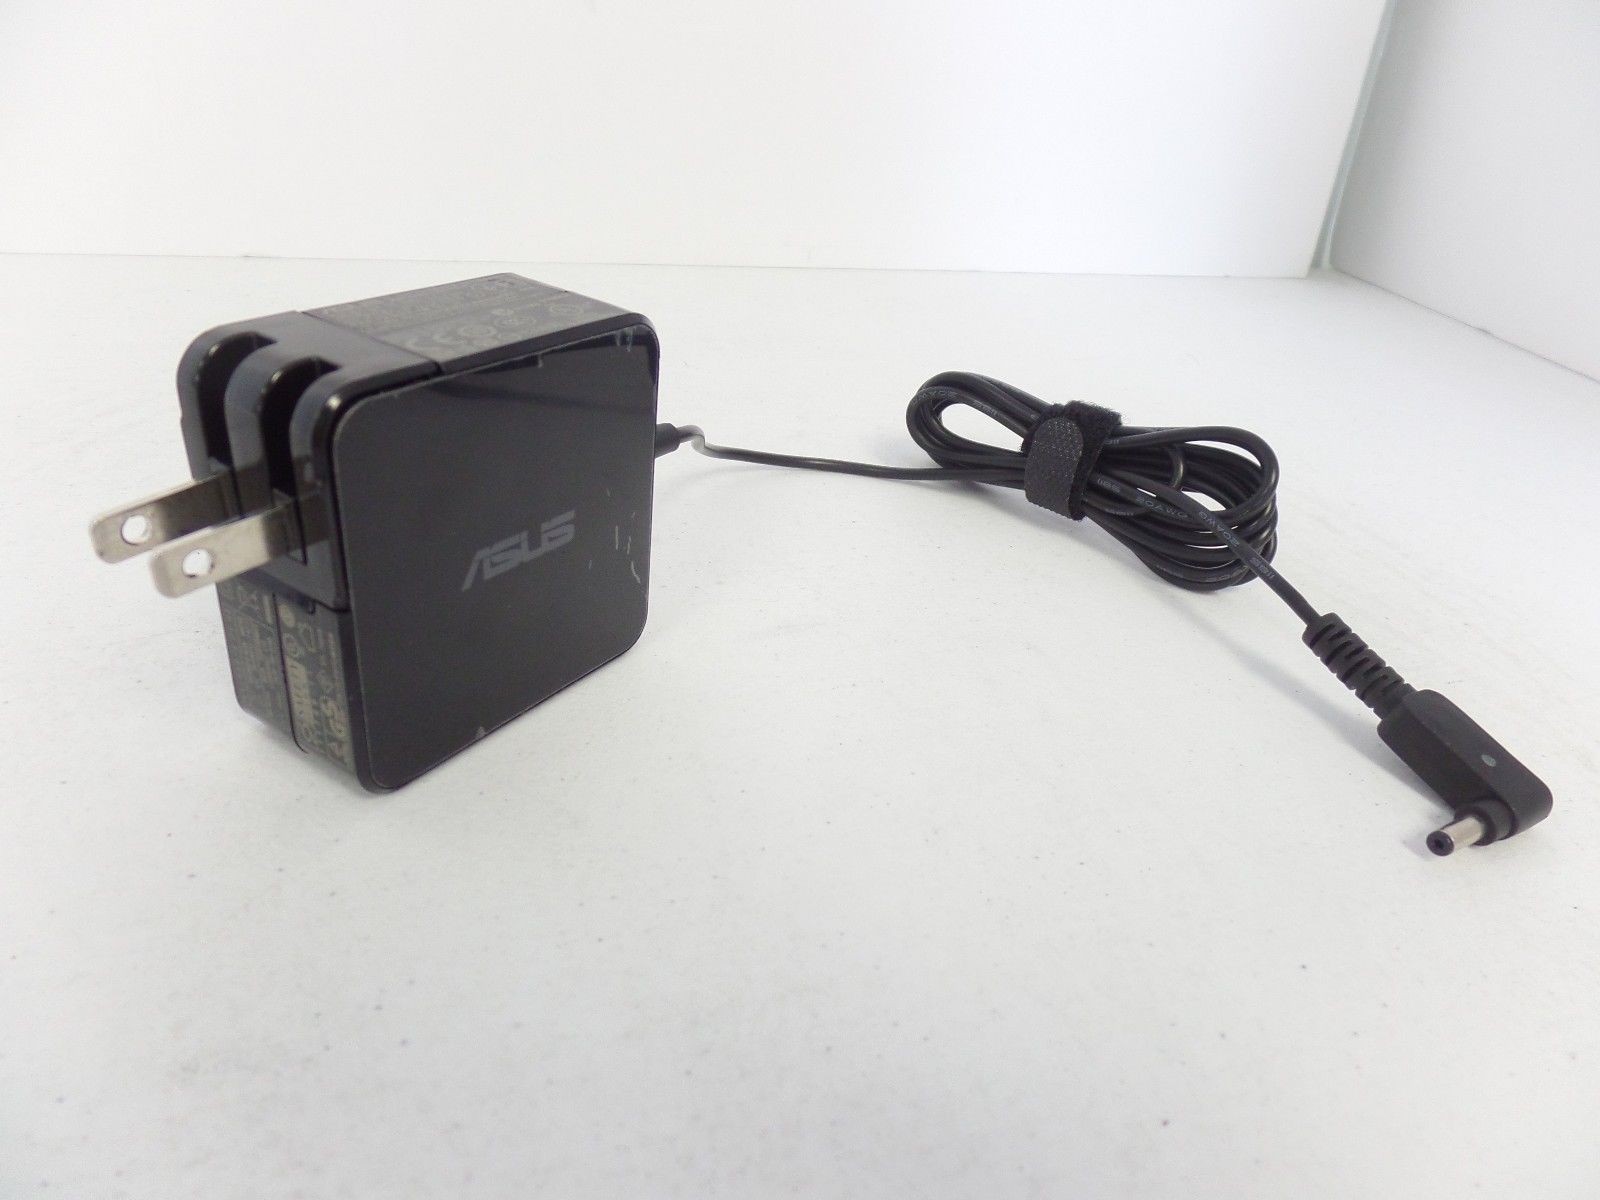 Laptop Charger AC Adapter Power Supply Asus C200 C300 C300MA ADP-33AW 19V 1.75A 